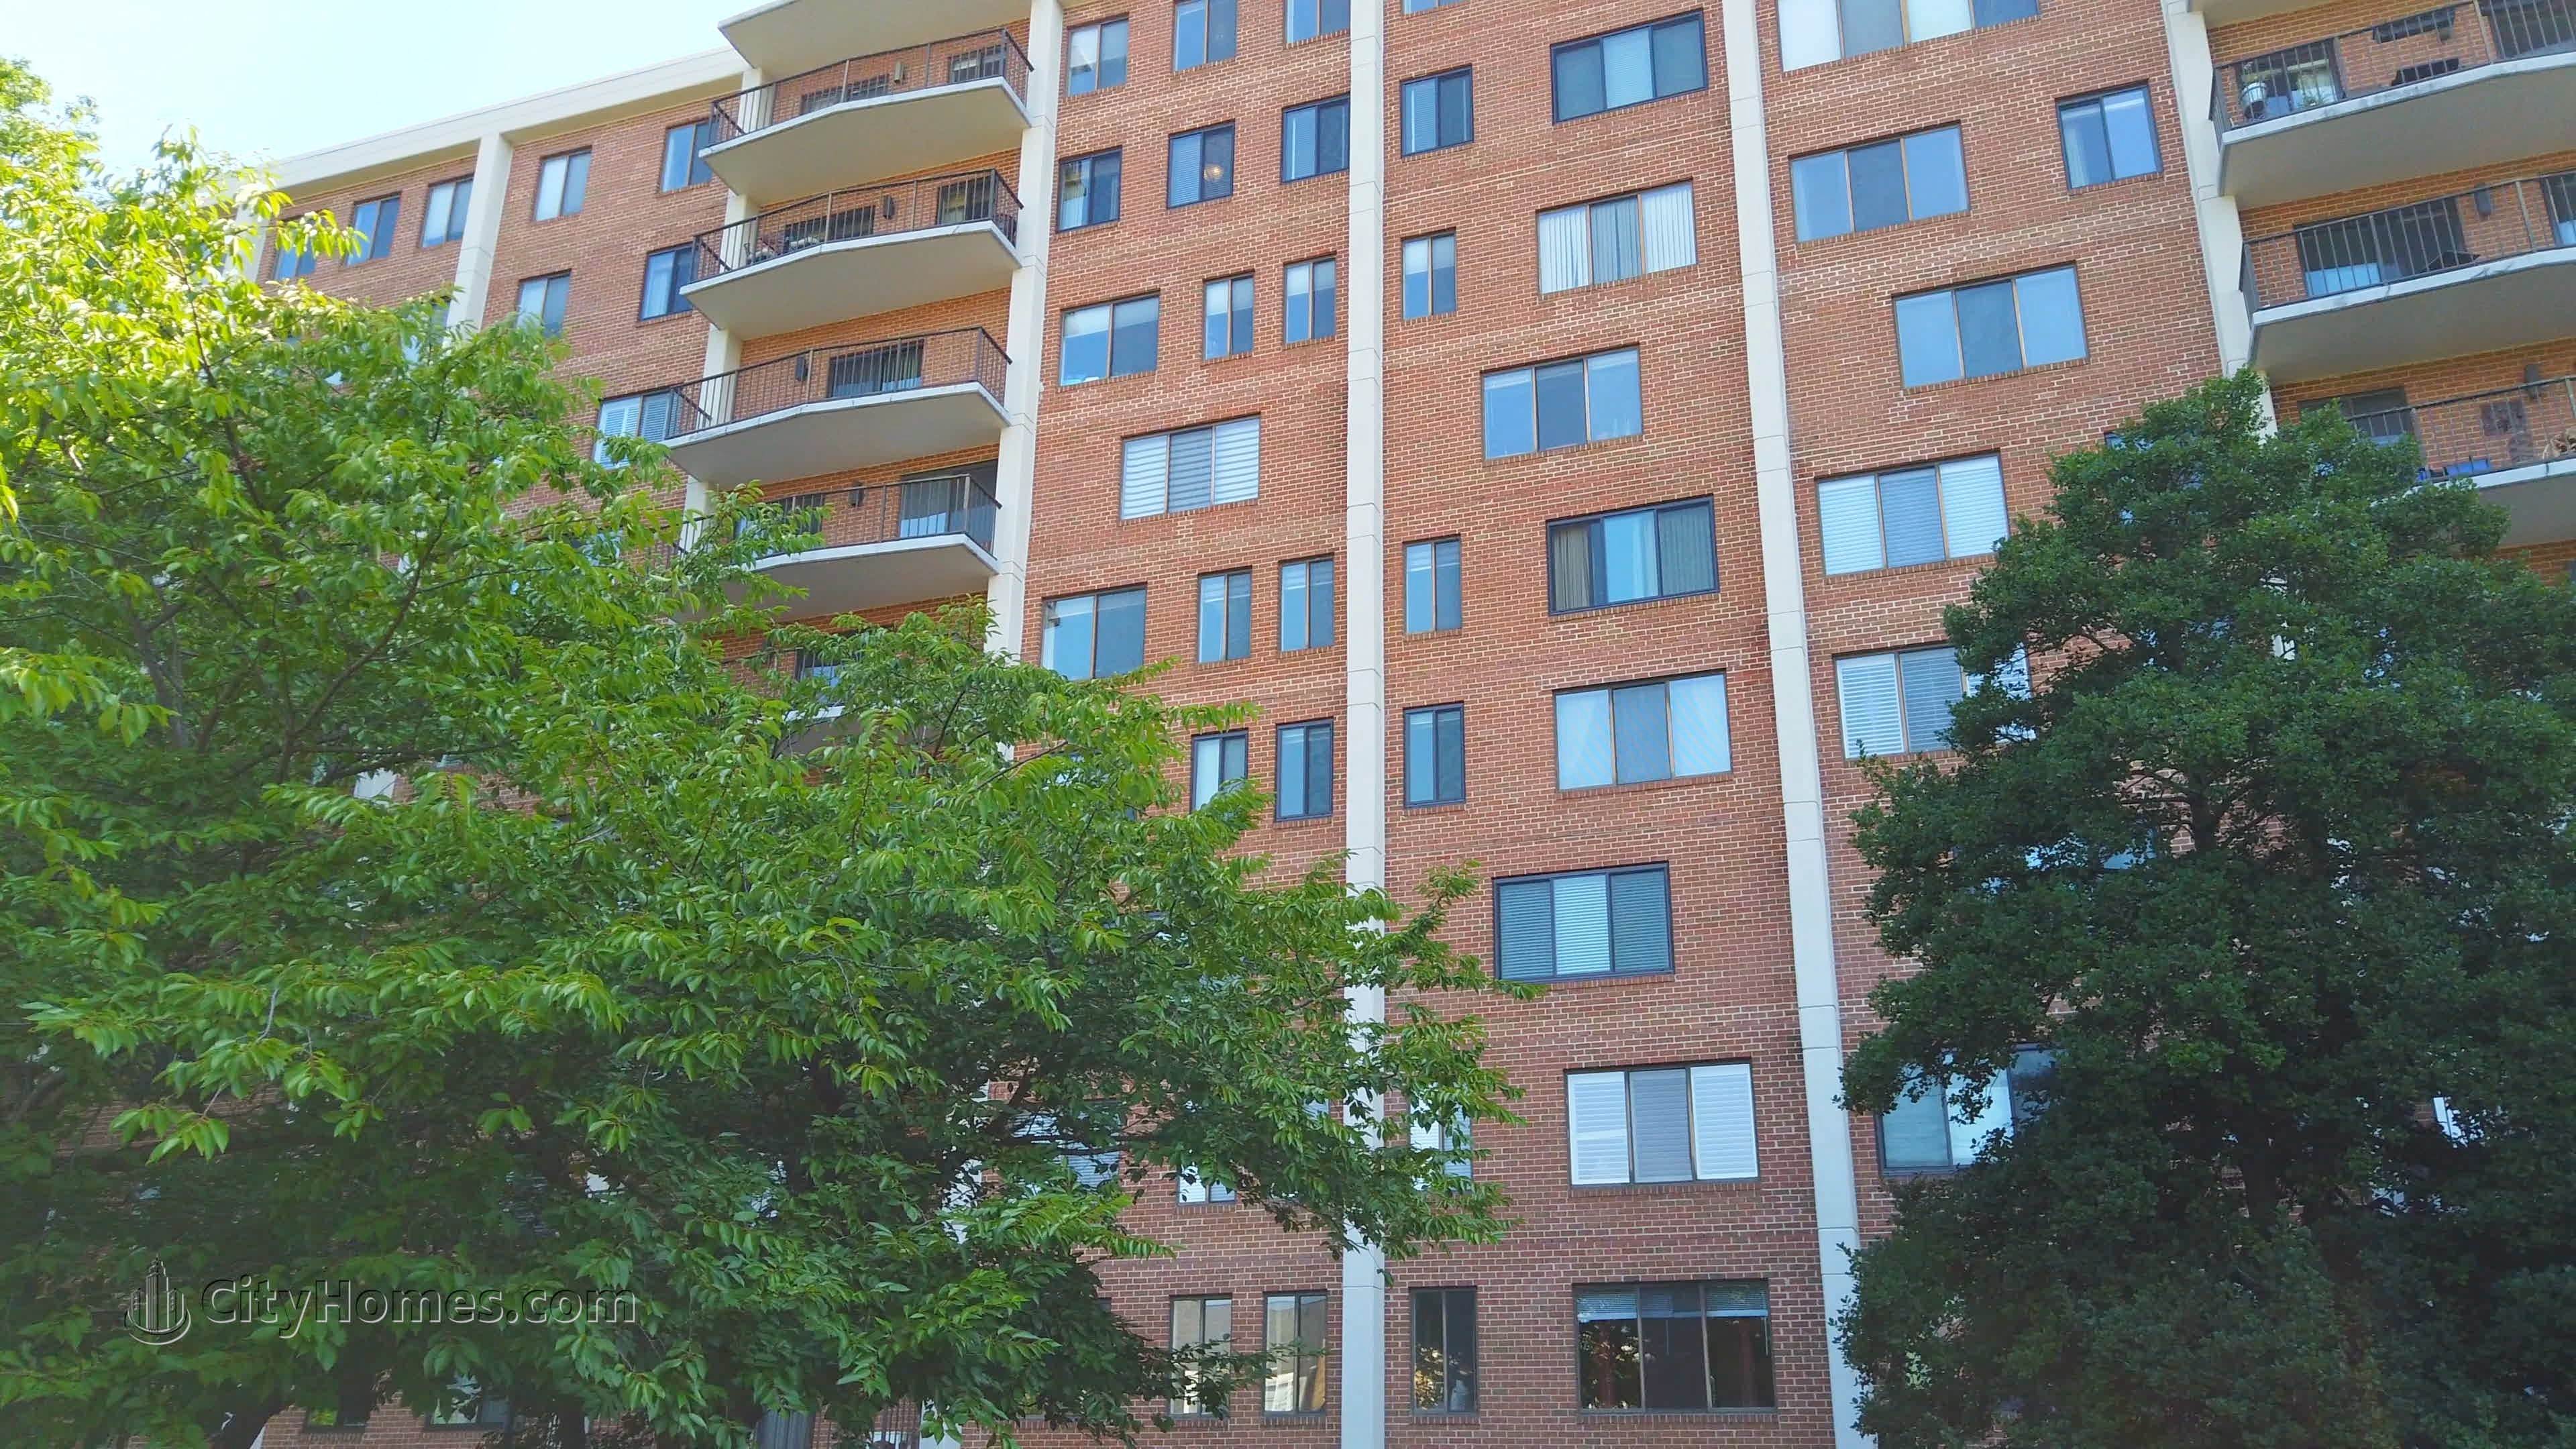 4. Sutton Towers建於 3101 New Mexico Ave NW, Wesley Heights, Washington, DC 20016